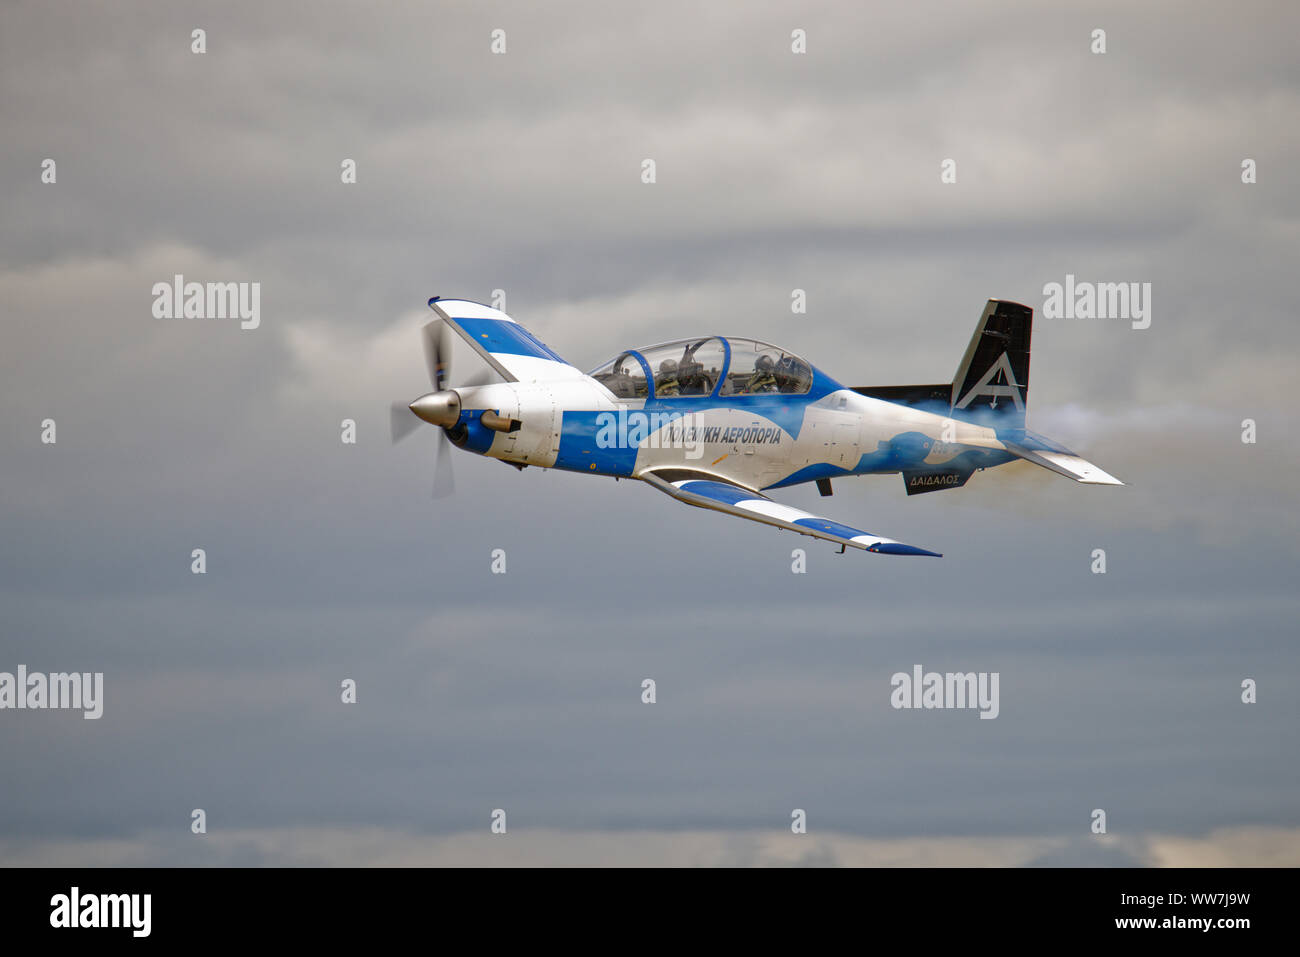 Beechcraft T-6 Texan II Turboprop Training aircraft from Demo Team Daedalus of the Hellenic Armed Forces displays at the RIAT Stock Photo